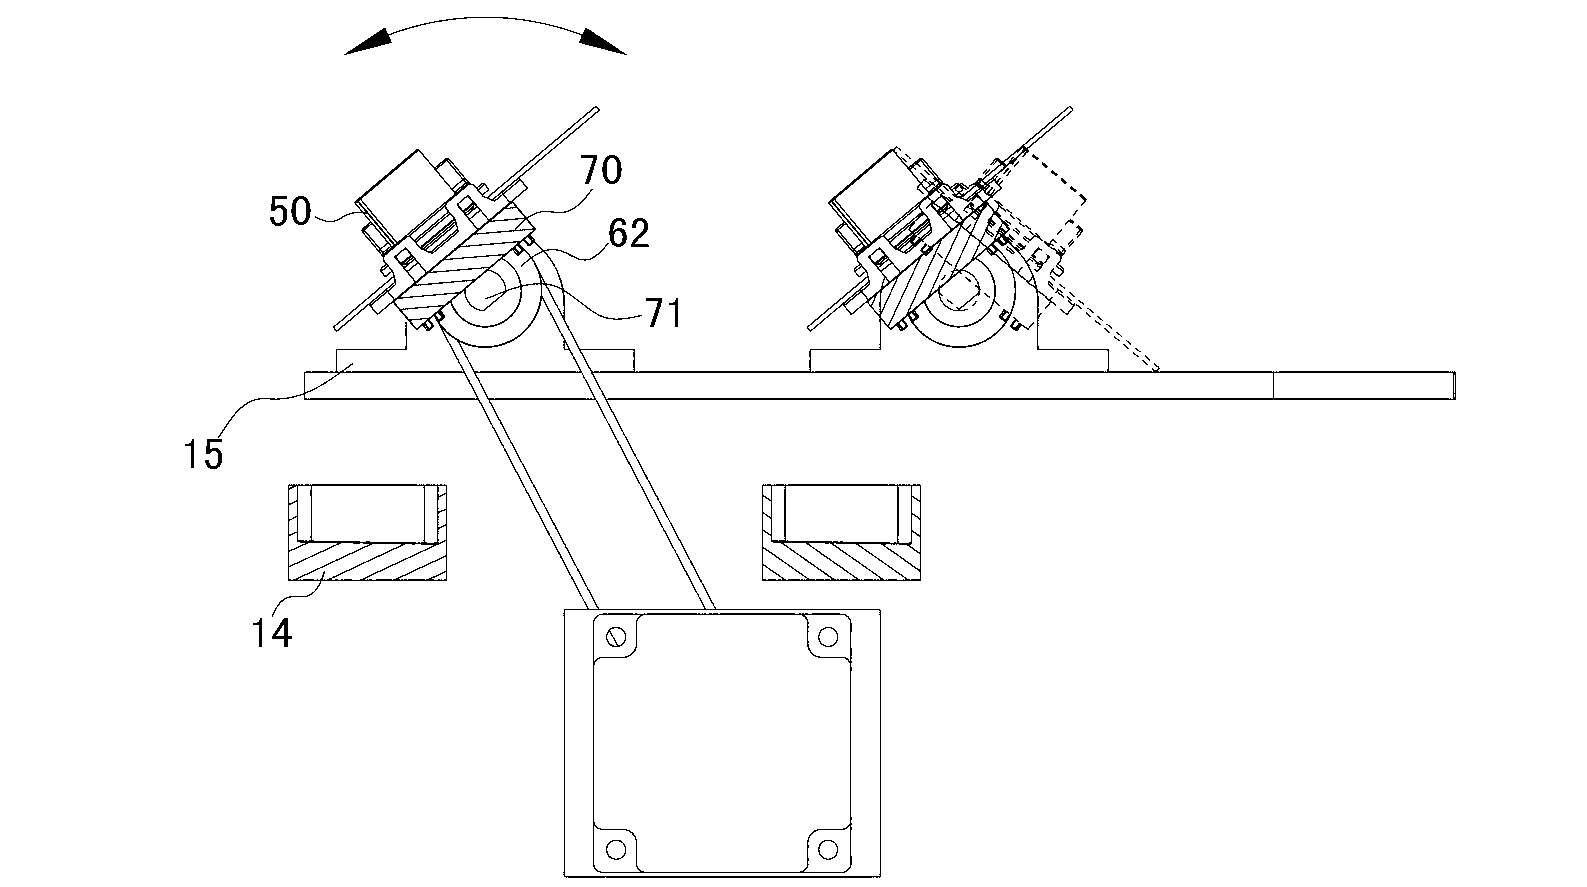 Tissue slice and cell smear sample treating device